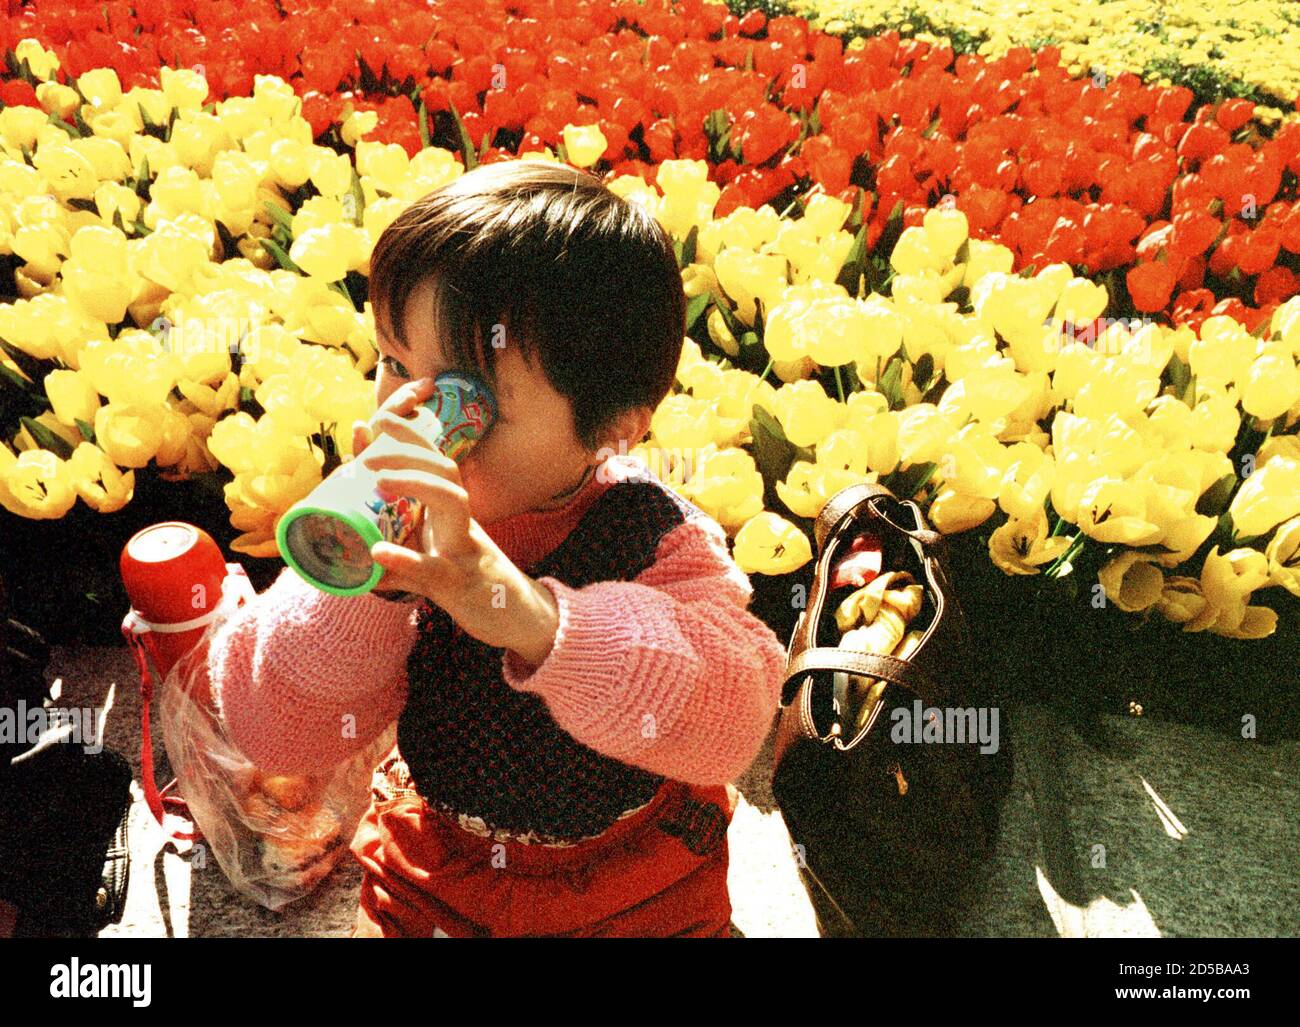 A Chinese girl looks through a kaleidoscope in front of a sea of tulips in central Beijing November 8. China always maintained its one-child policy imposed 20 years ago has helped stabilised the world's population. The policy is ferociously opposed by 'pro-lifers' in the west who accuse China of conducting forced abortions and other coercive birth control measures.  ASW Stock Photo